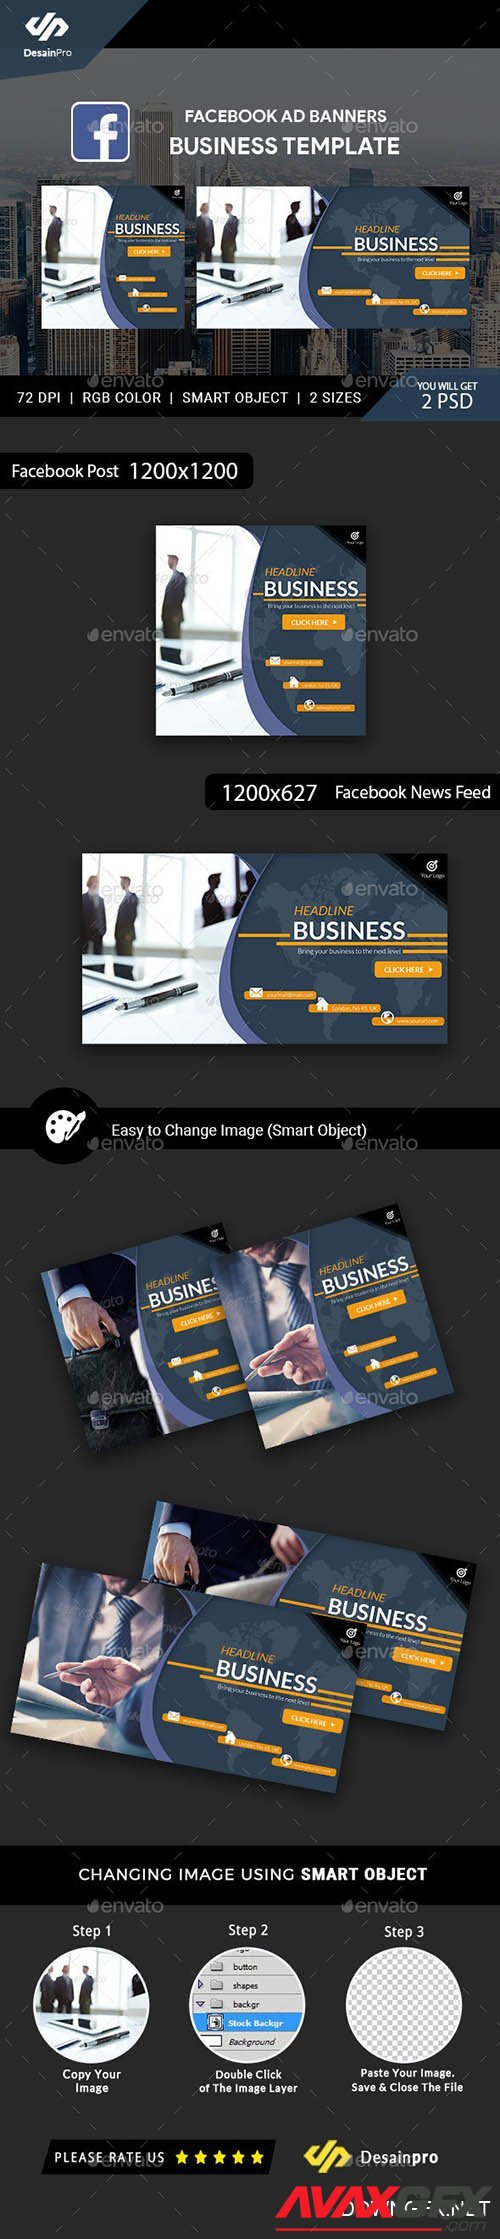 Graphicriver - Business Service Facebook Ad Banners - AR 21402857